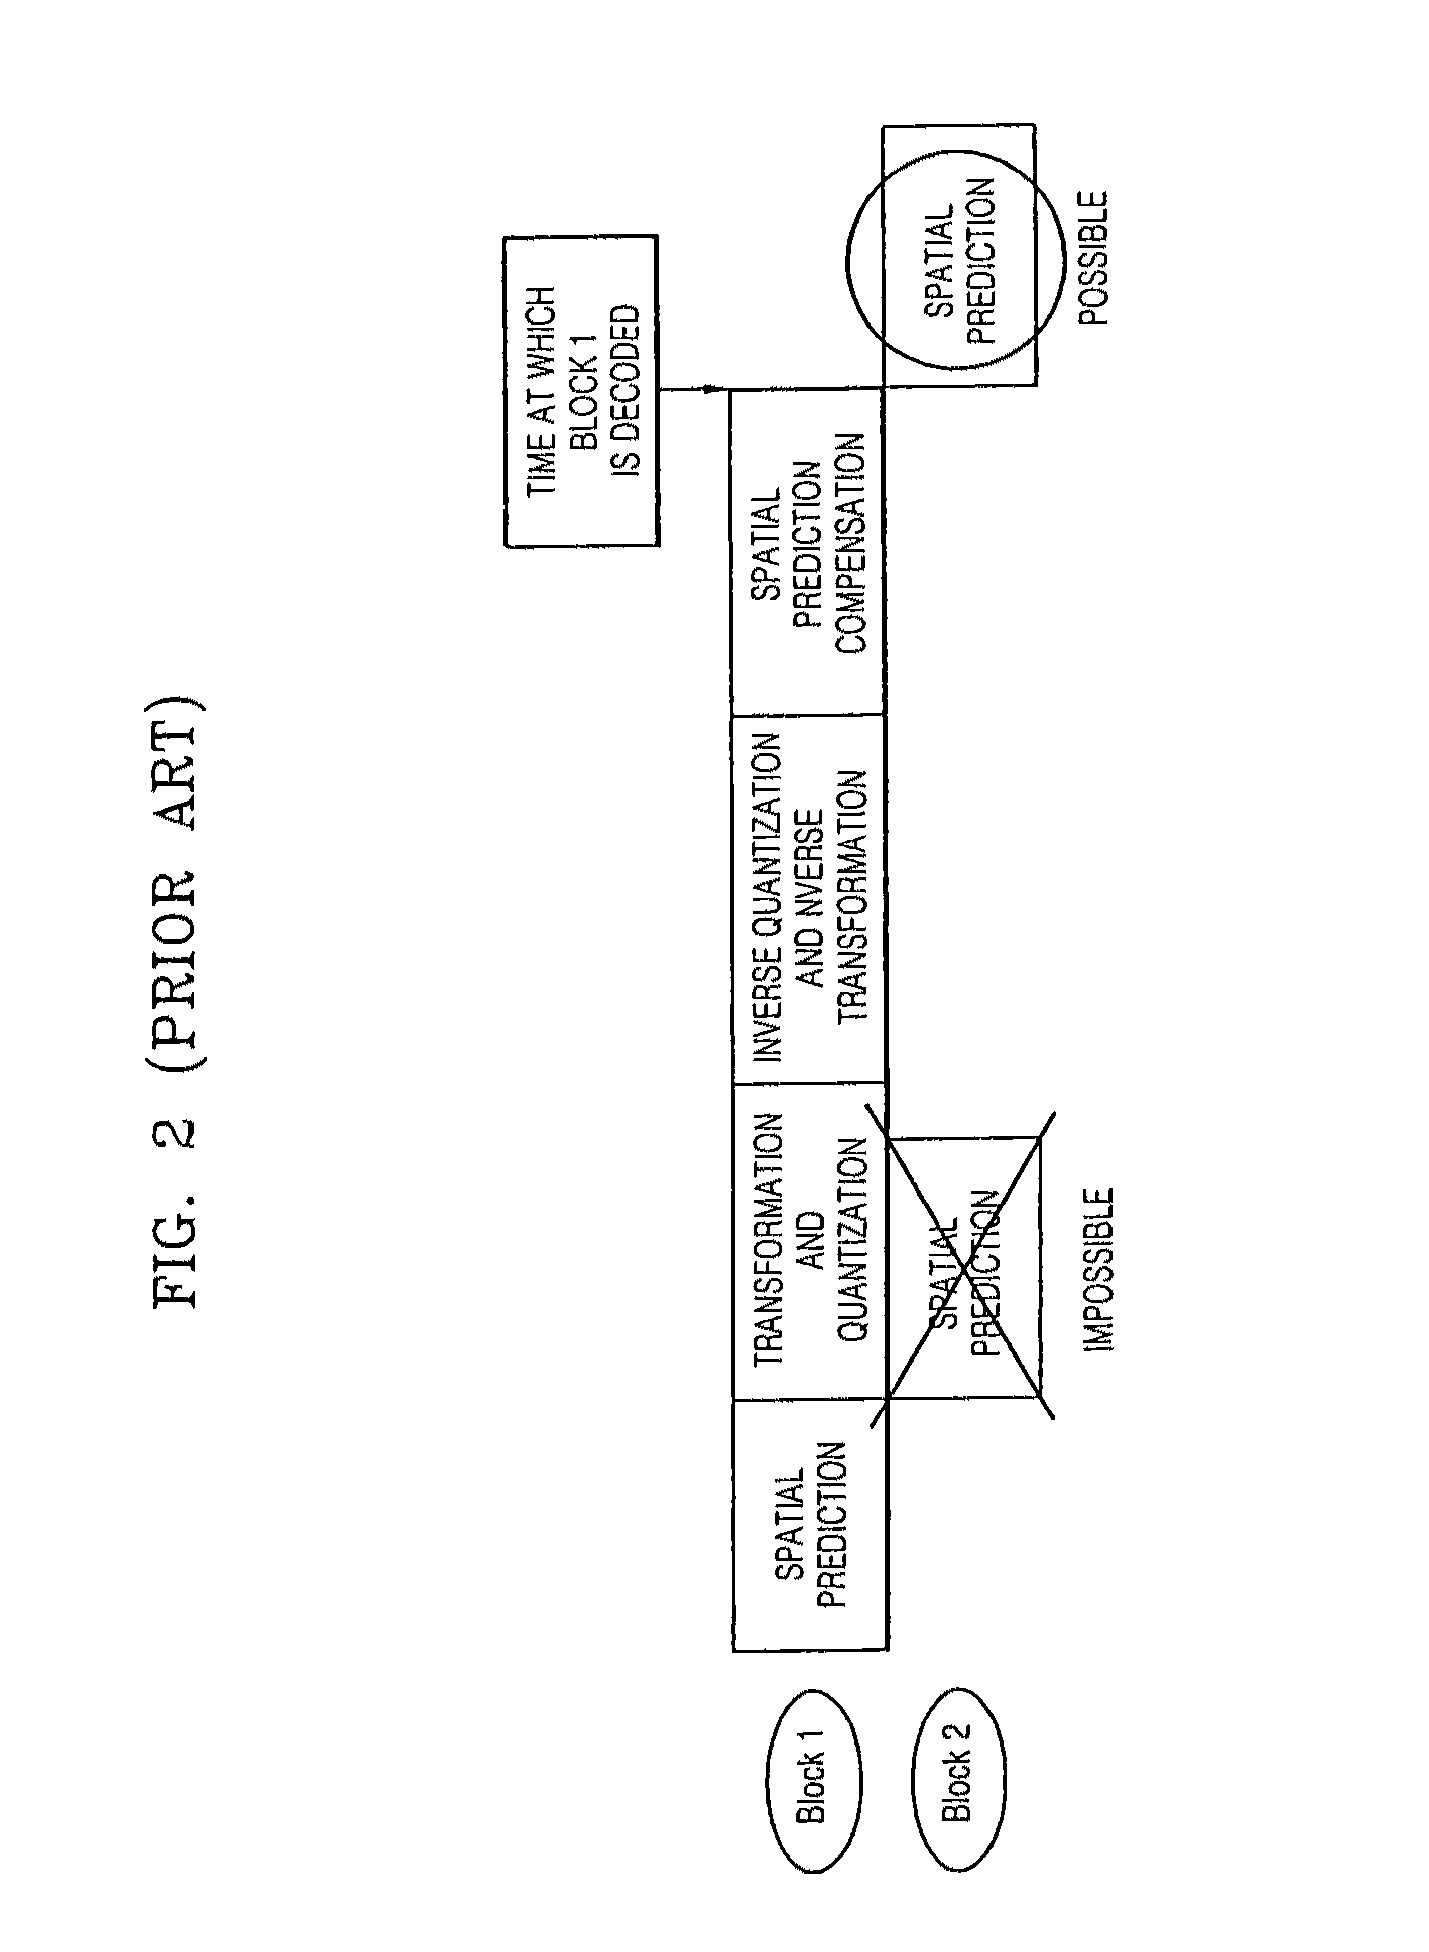 Encoding and/or decoding system, medium, and method with spatial prediction and spatial prediction compensation of image data